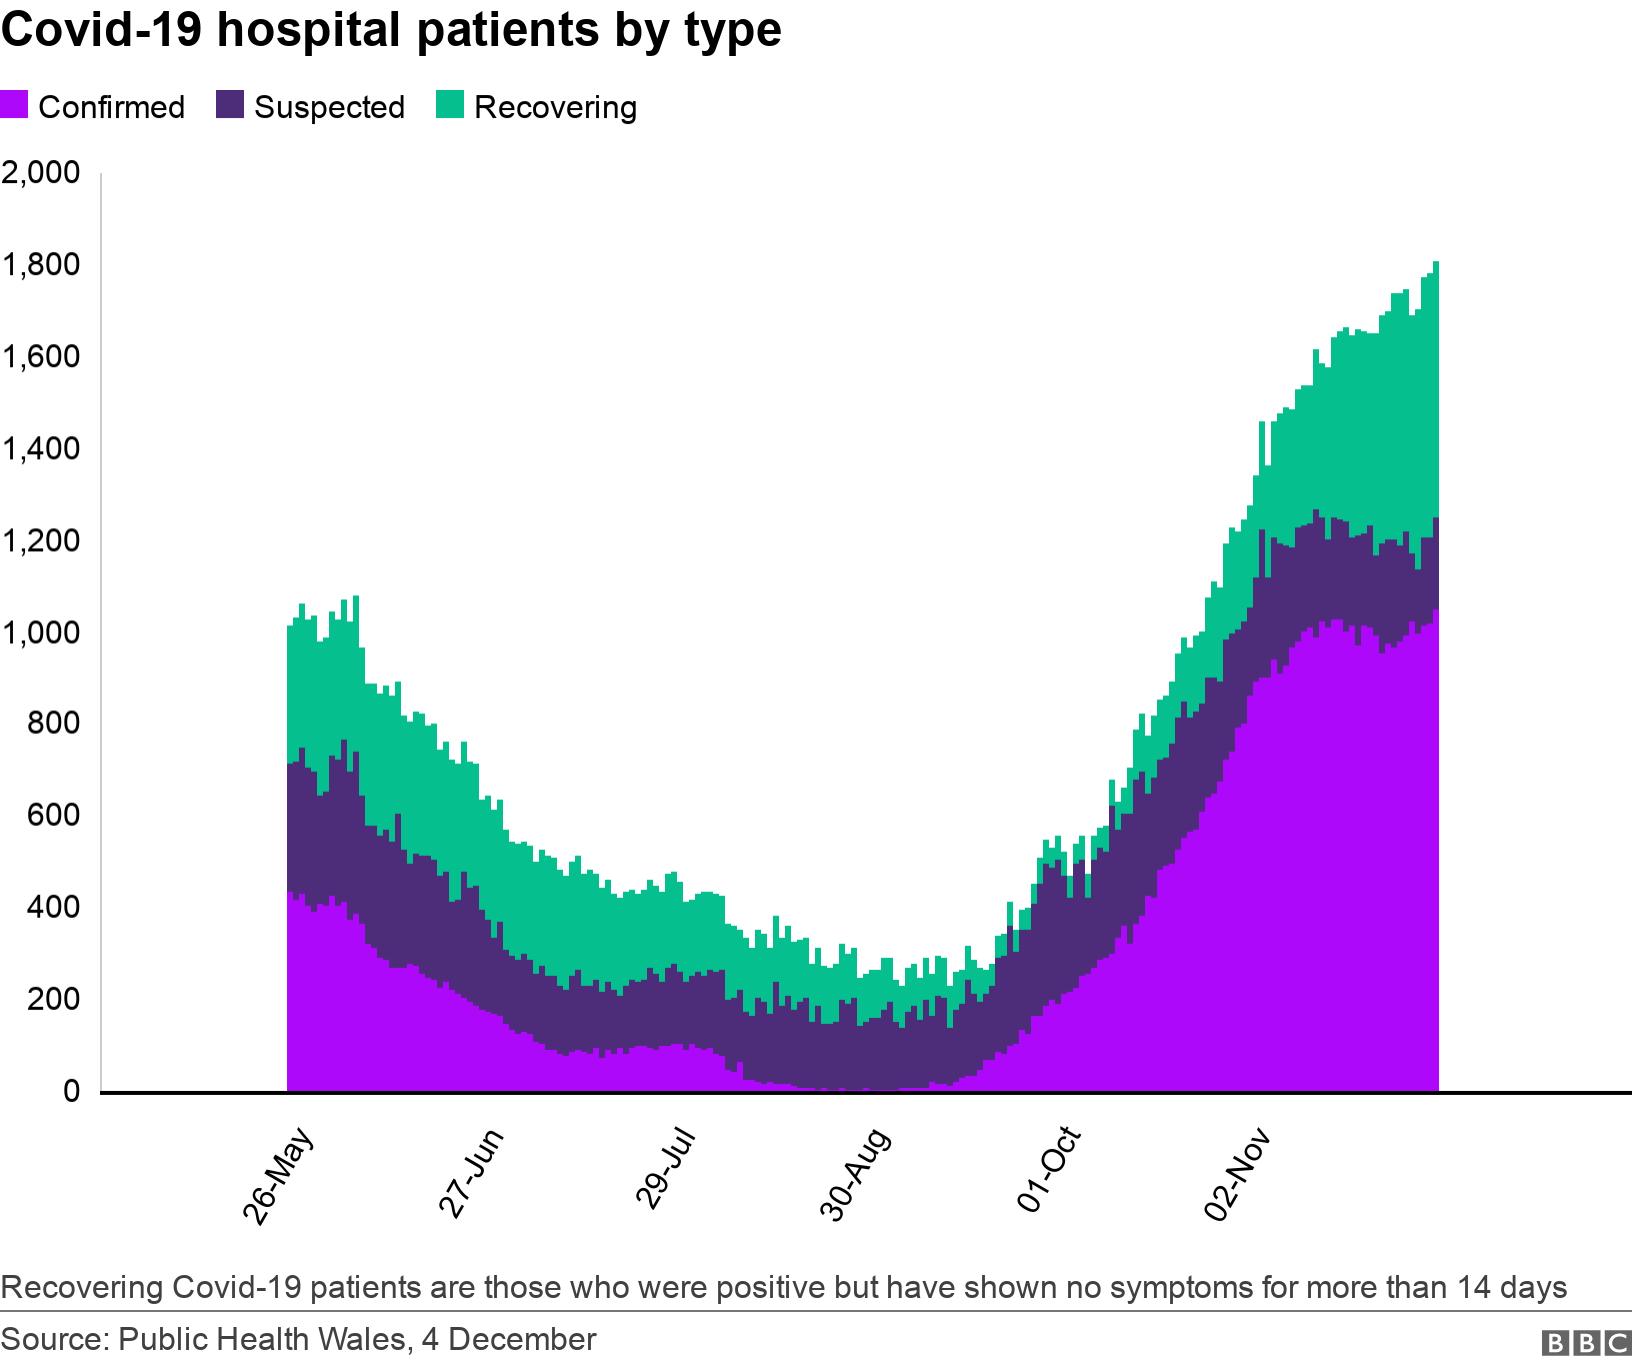 Covid-19 hospital patients by type. .  Recovering Covid-19 patients are those who were positive but have shown no symptoms for more than 14 days.